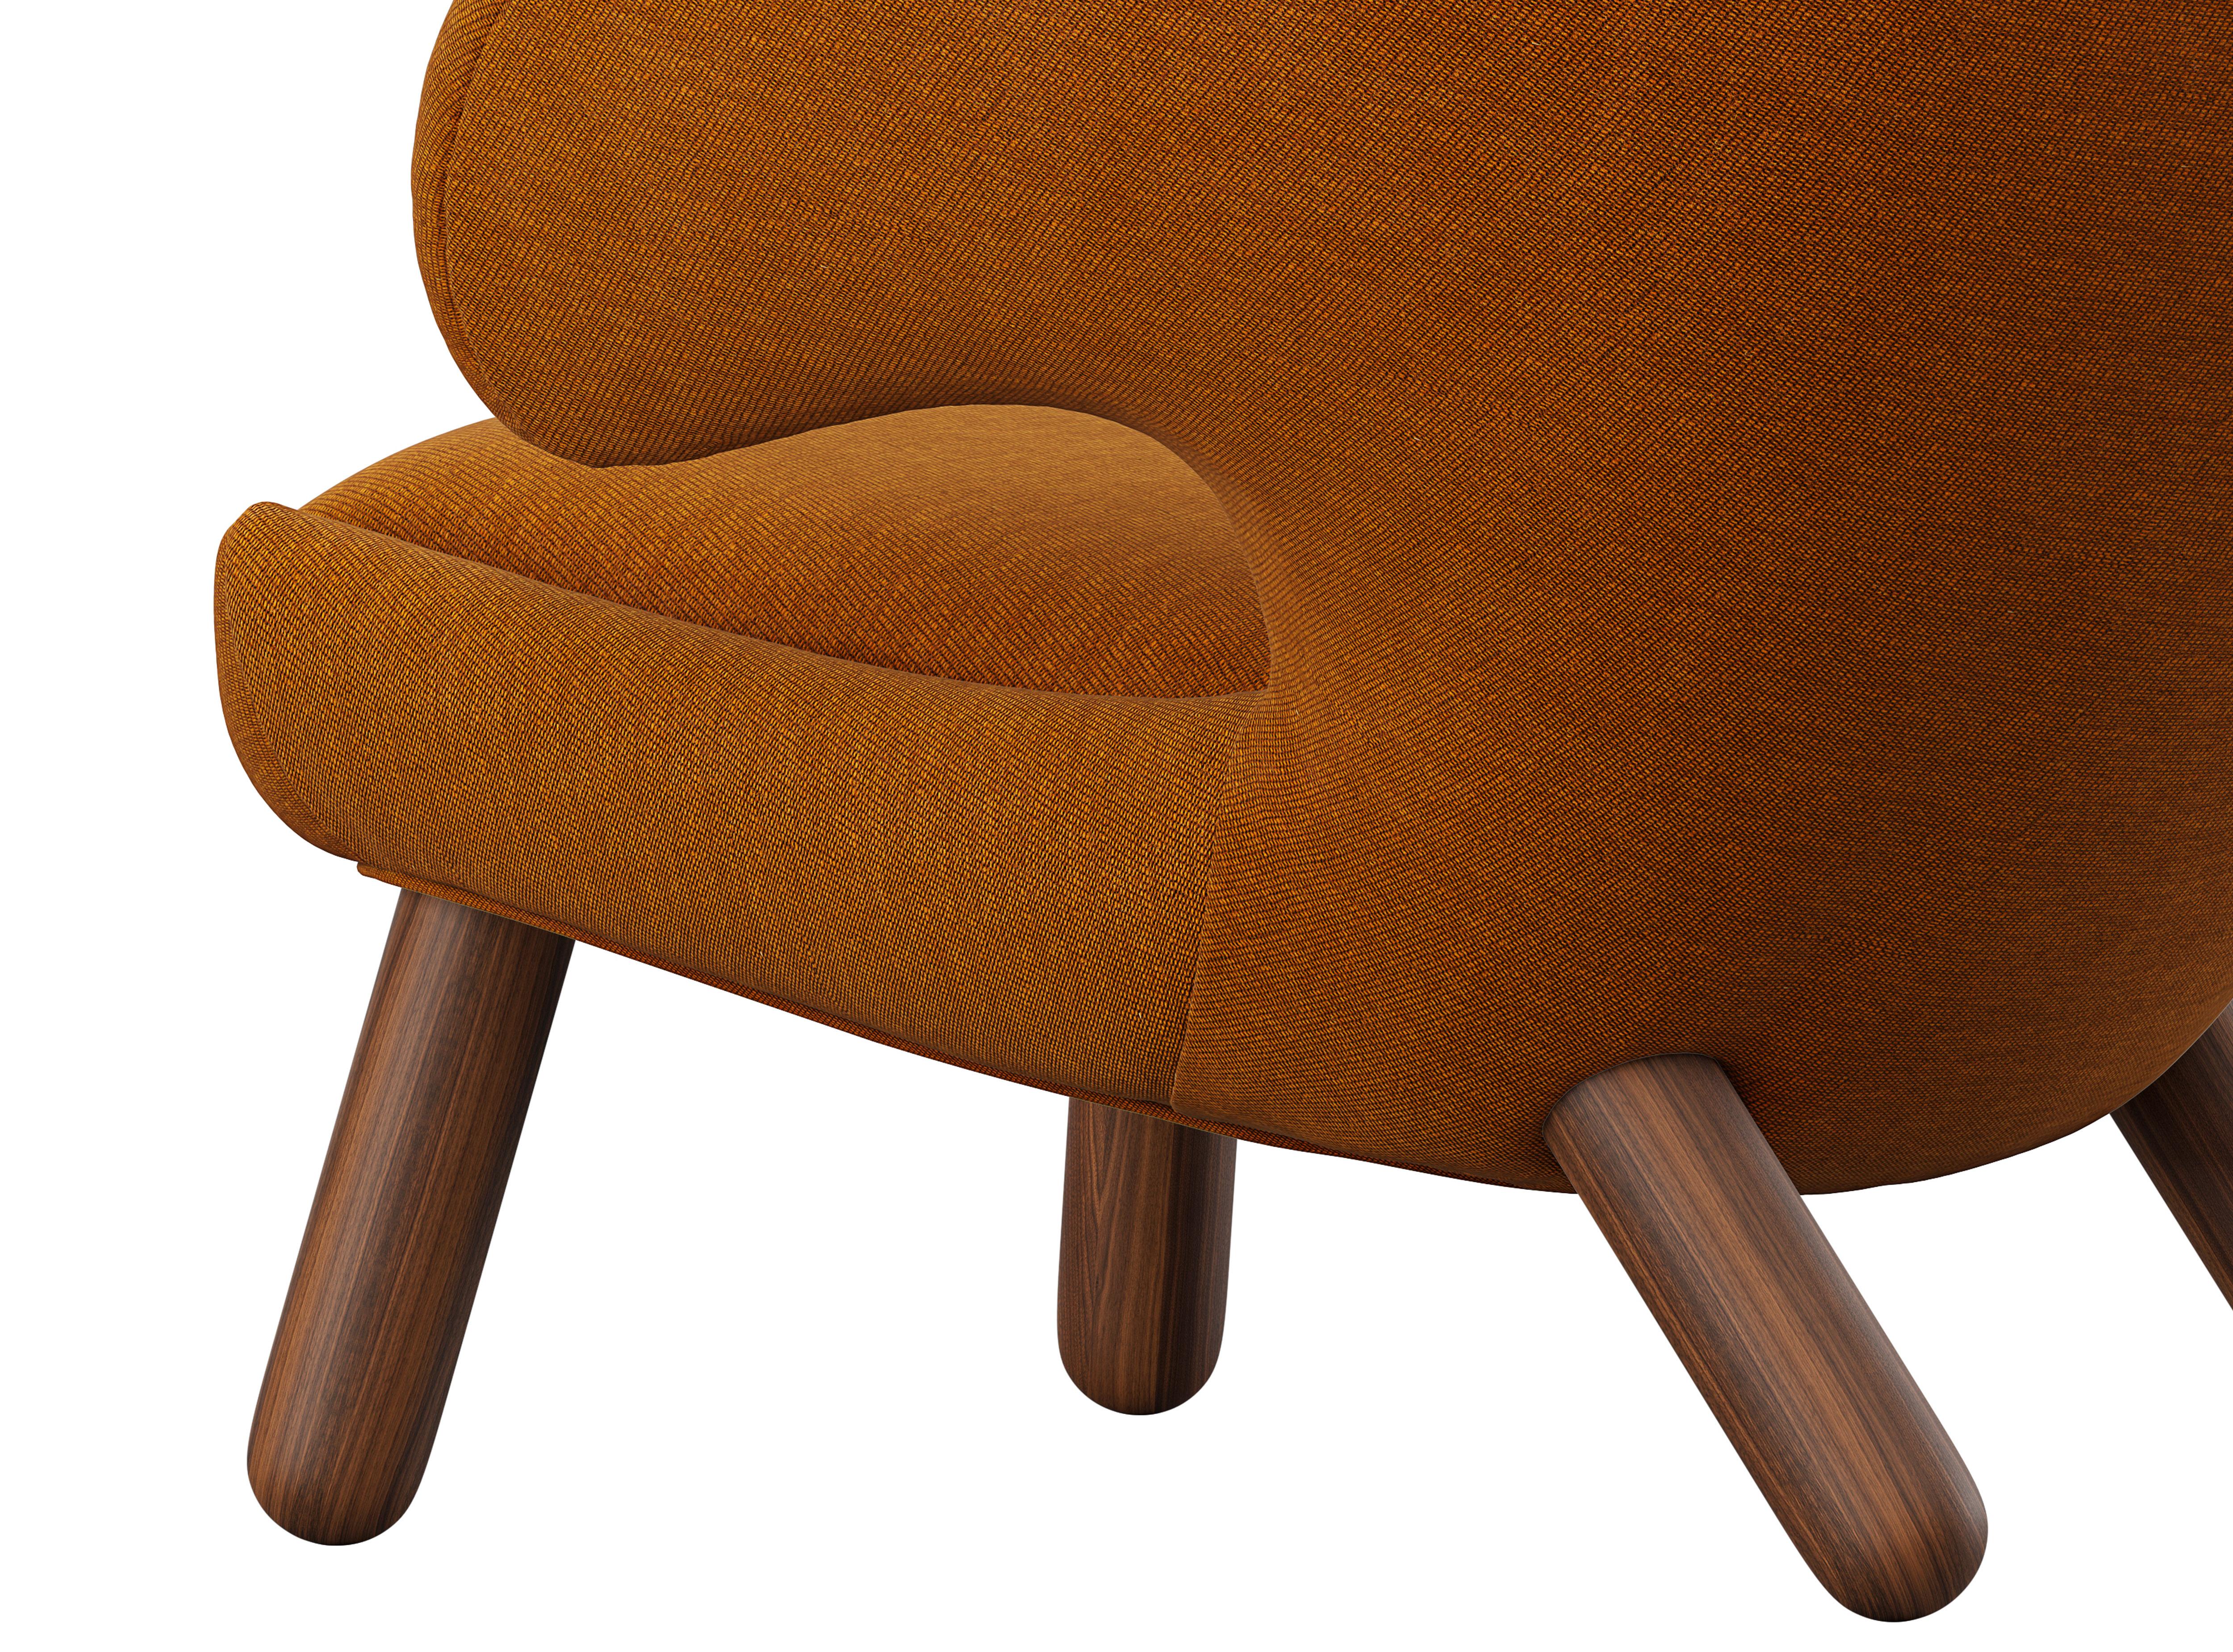 Danish Set of Two Finn Juhl Pelican Chairs Upholstered in Wood and Fabric